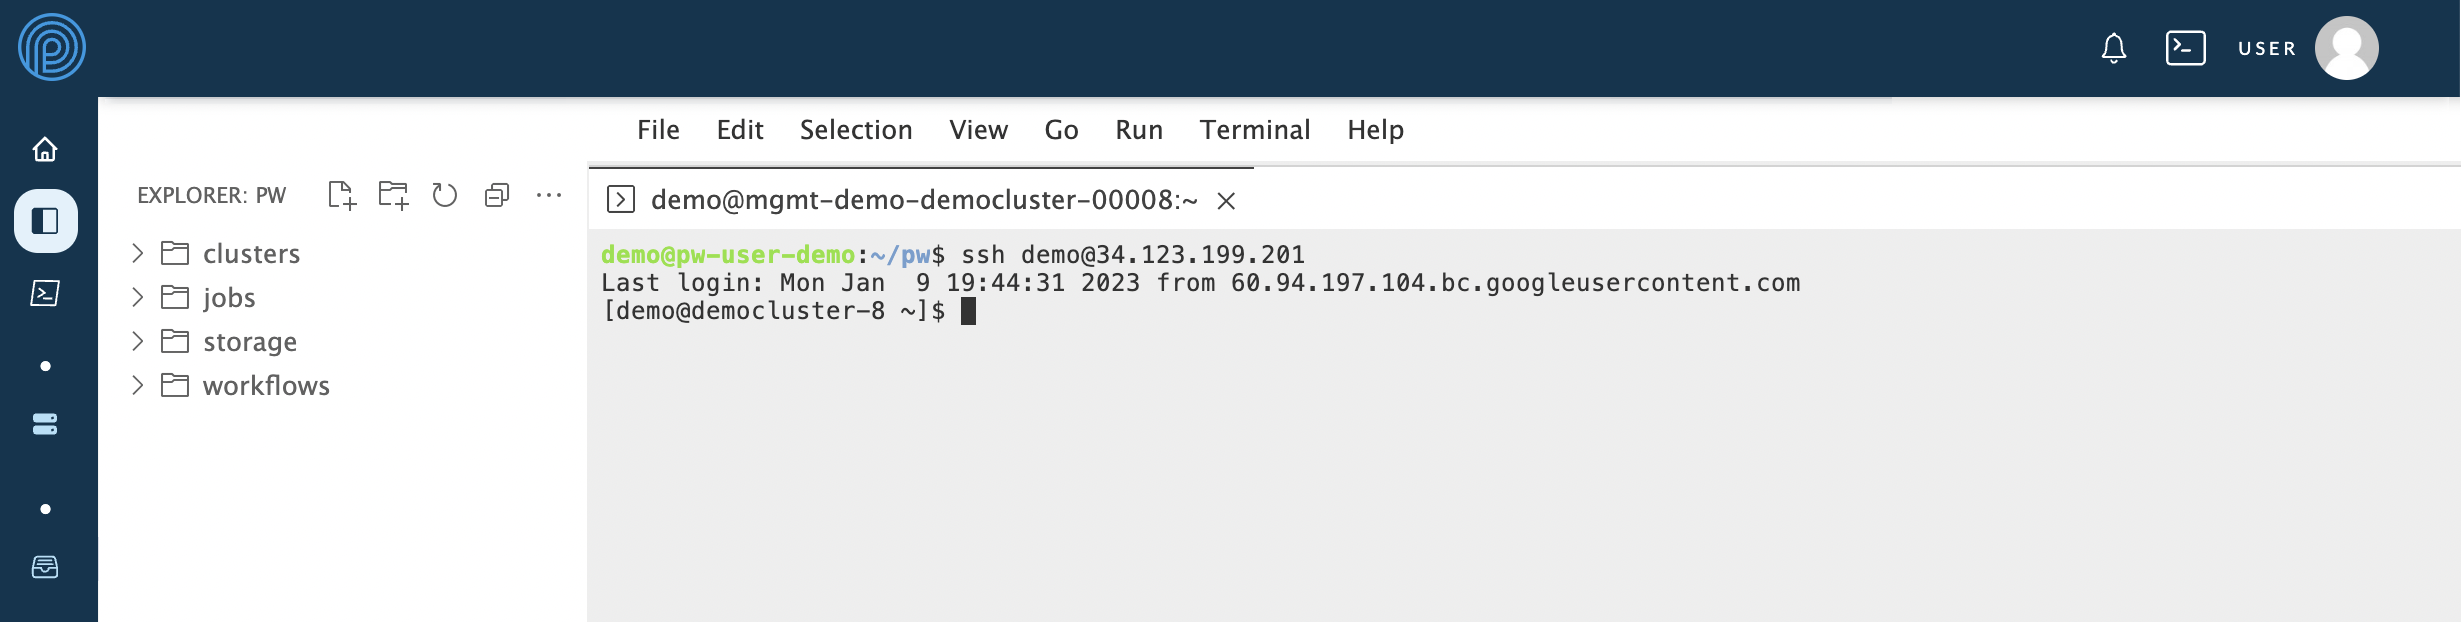 Screenshot of an IDE terminal after using SSH with the cluster IP address to log in to the controller.